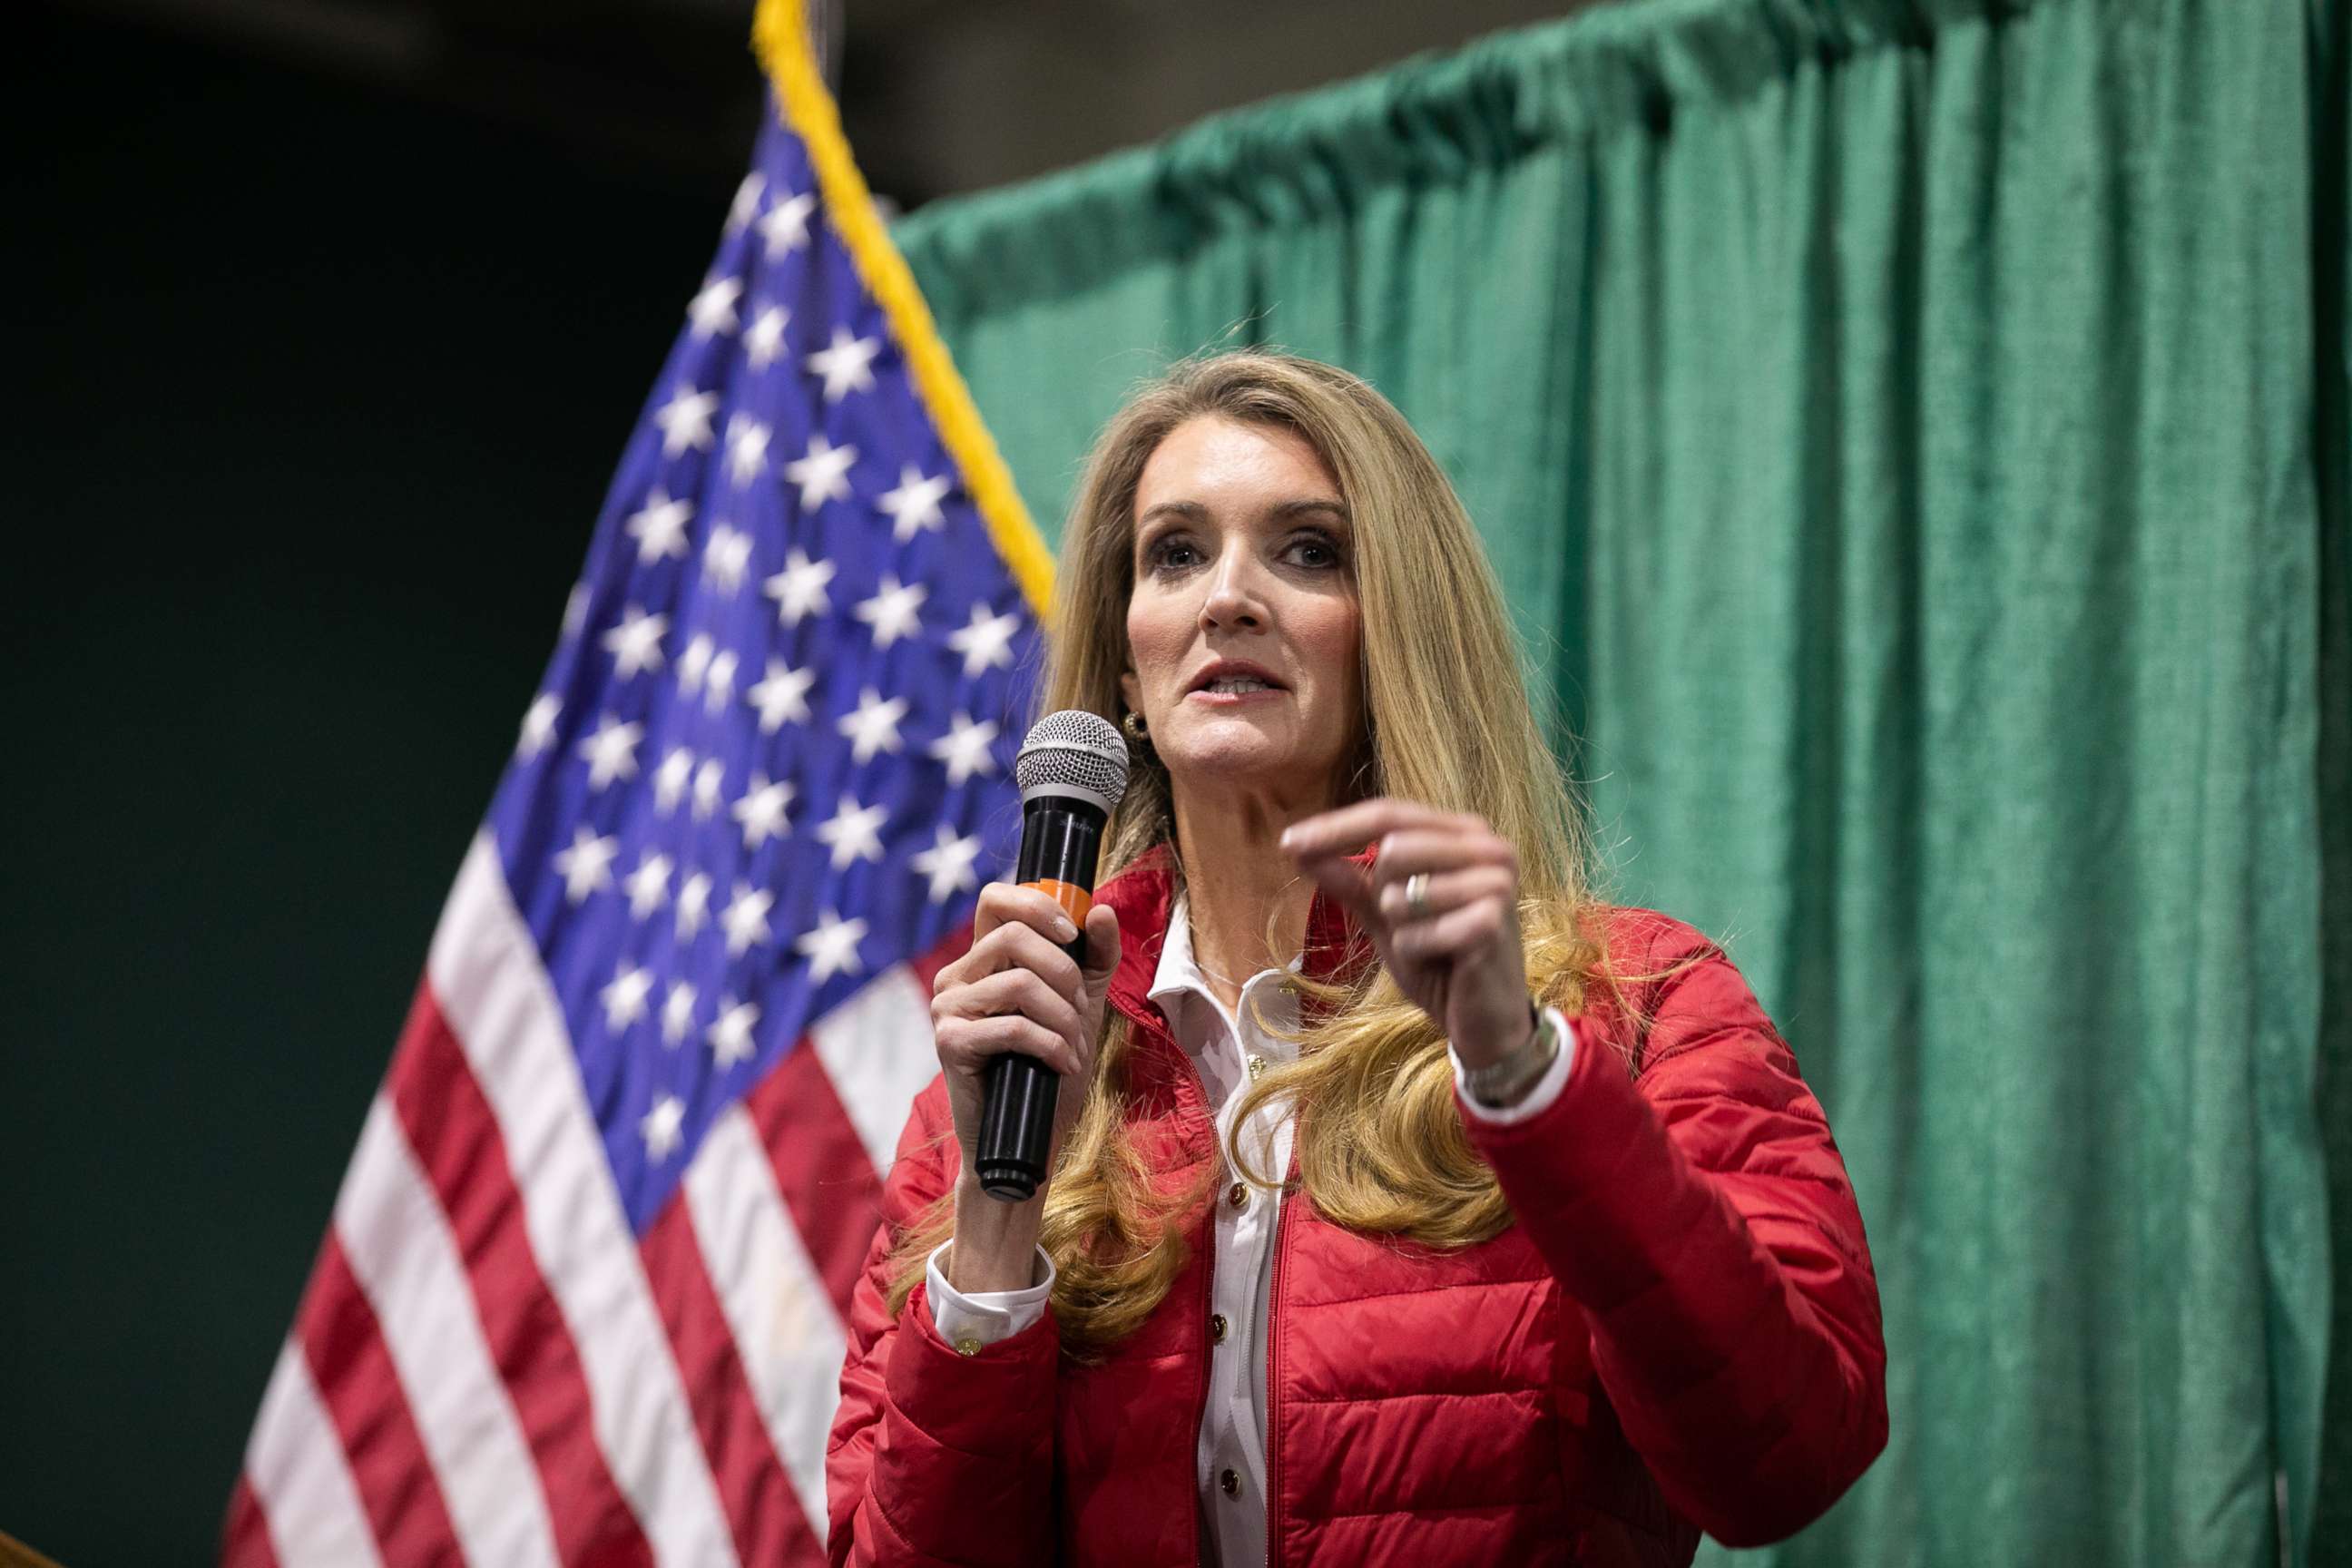 PHOTO: U.S. Sen. Kelly Loeffler, R-Ga., speaks to the crowd of supporters during a "Defend the Majority" rally at the Georgia National Fairgrounds and Agriculture Center on Nov. 19, 2020 in Perry, Ga.